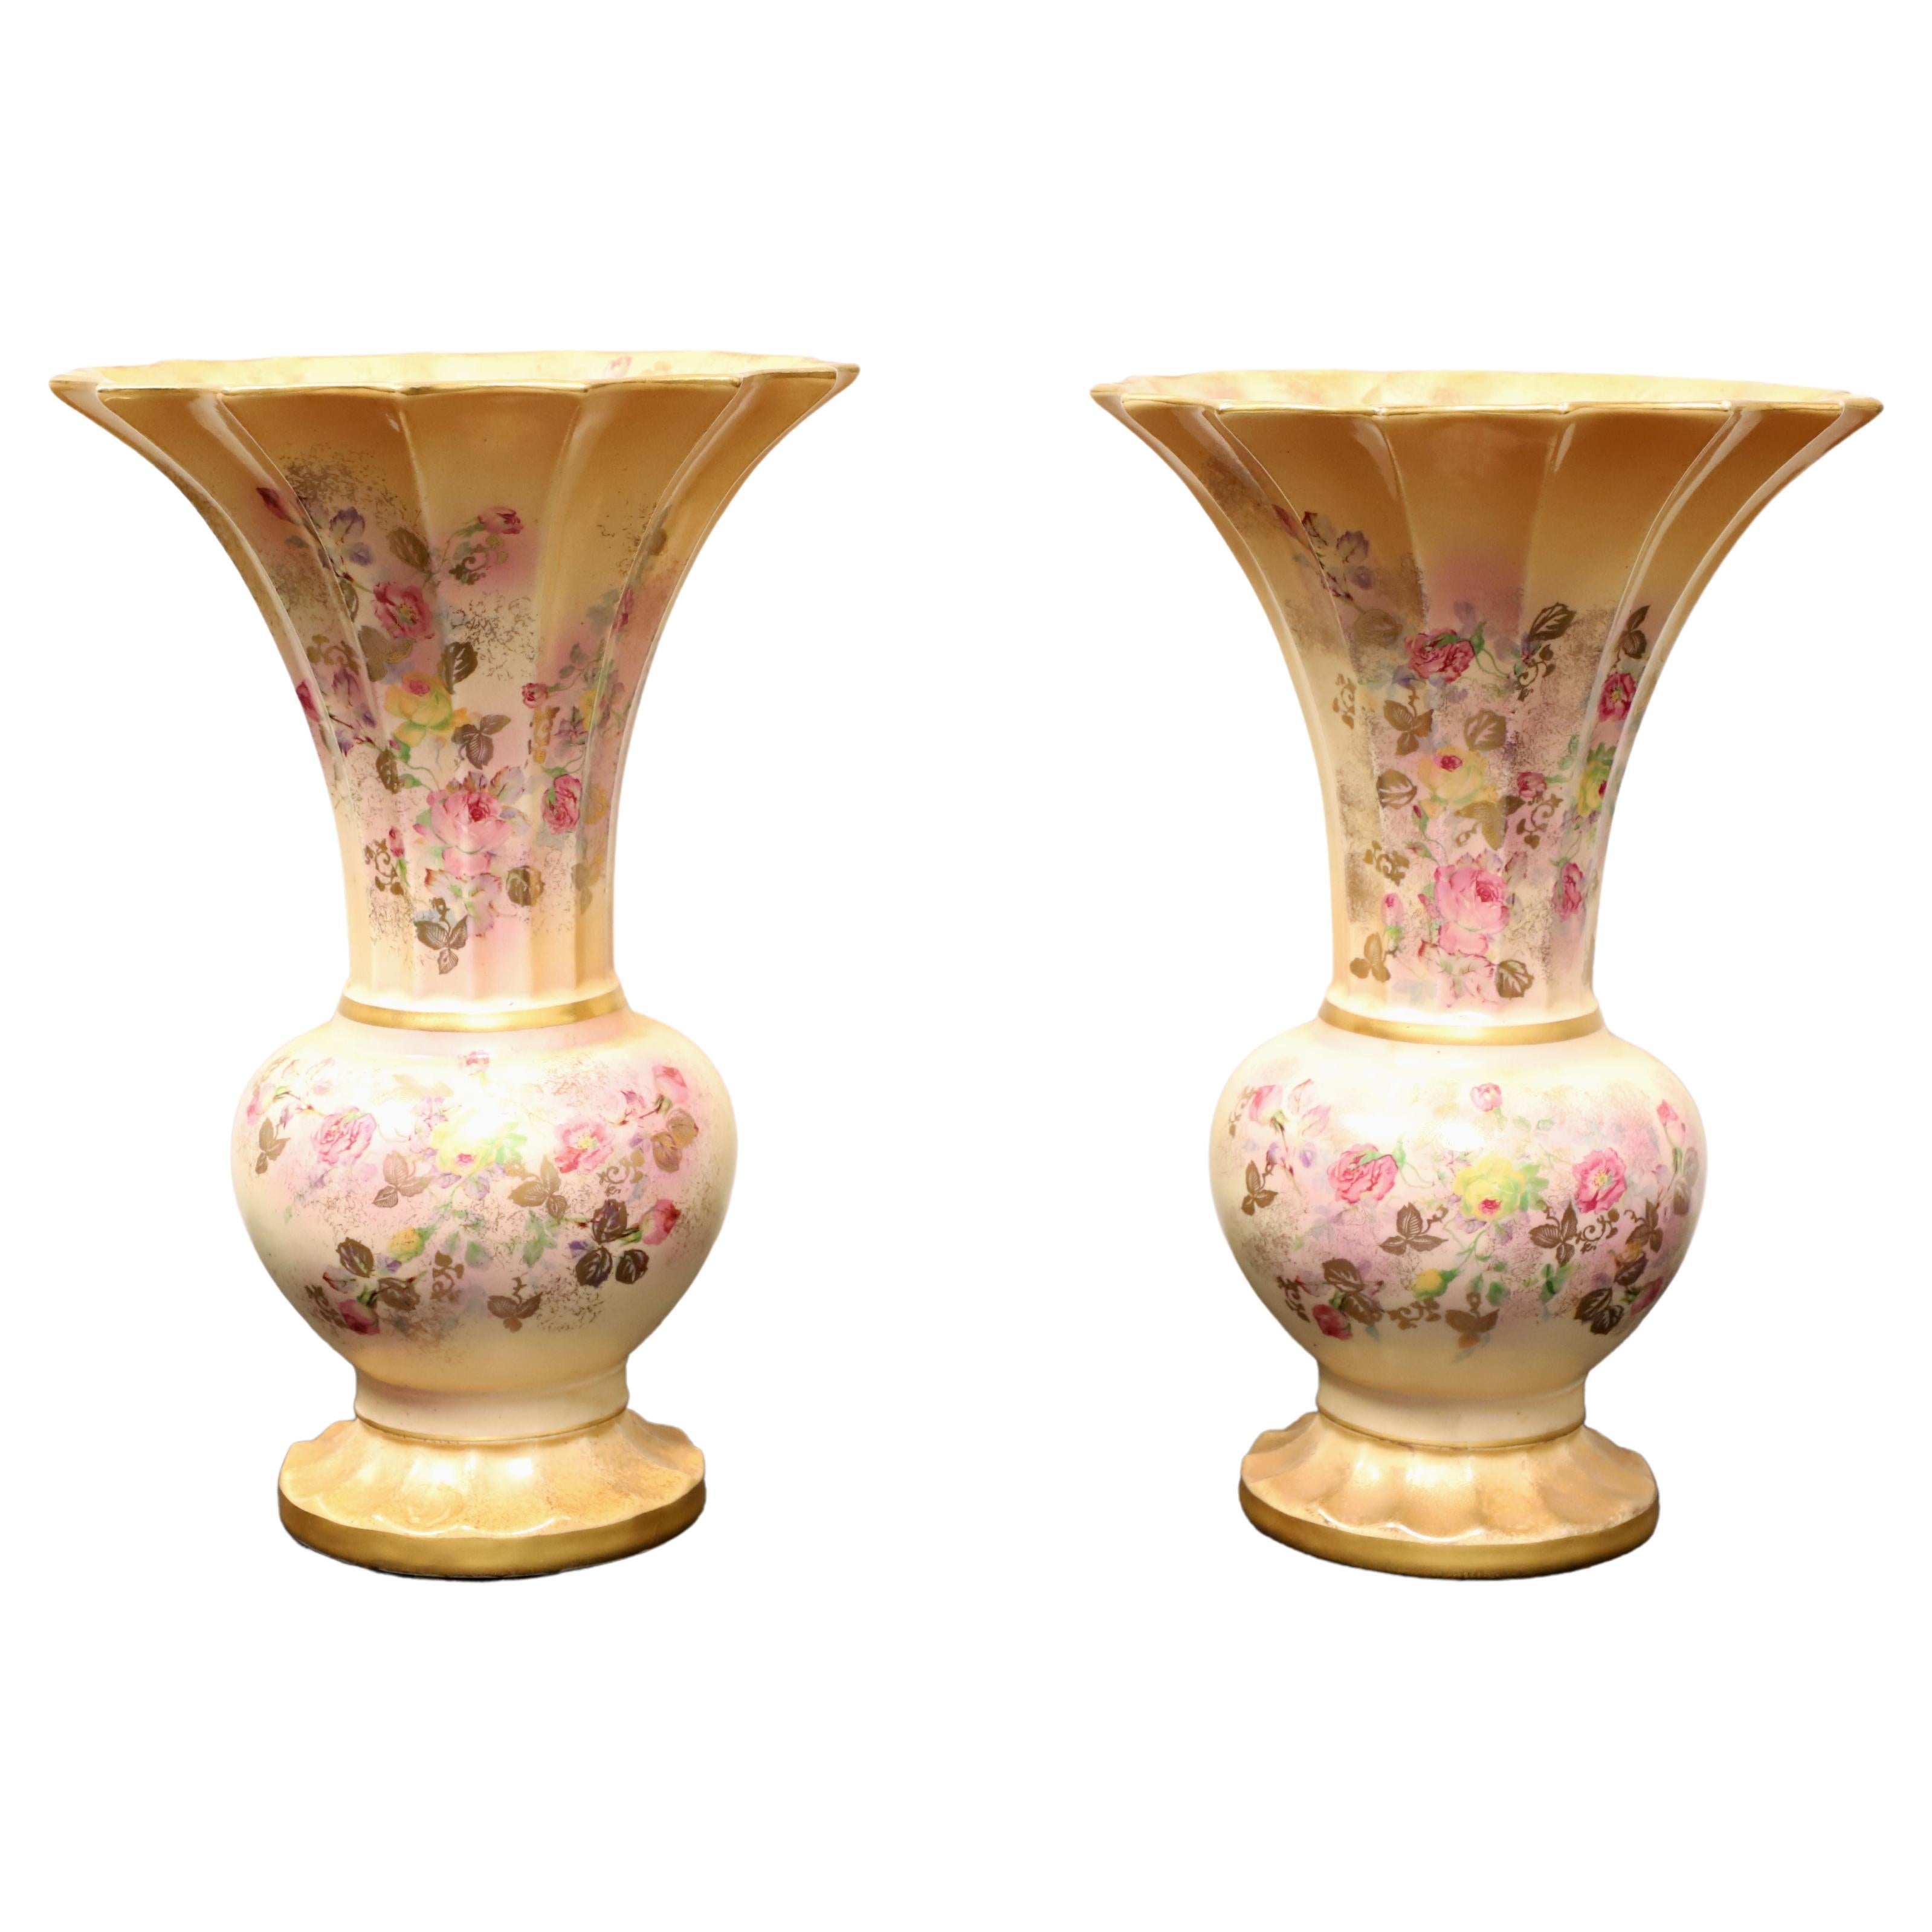 BECKWITH CHINA Hand Painted Porcelain Vases - Pair For Sale